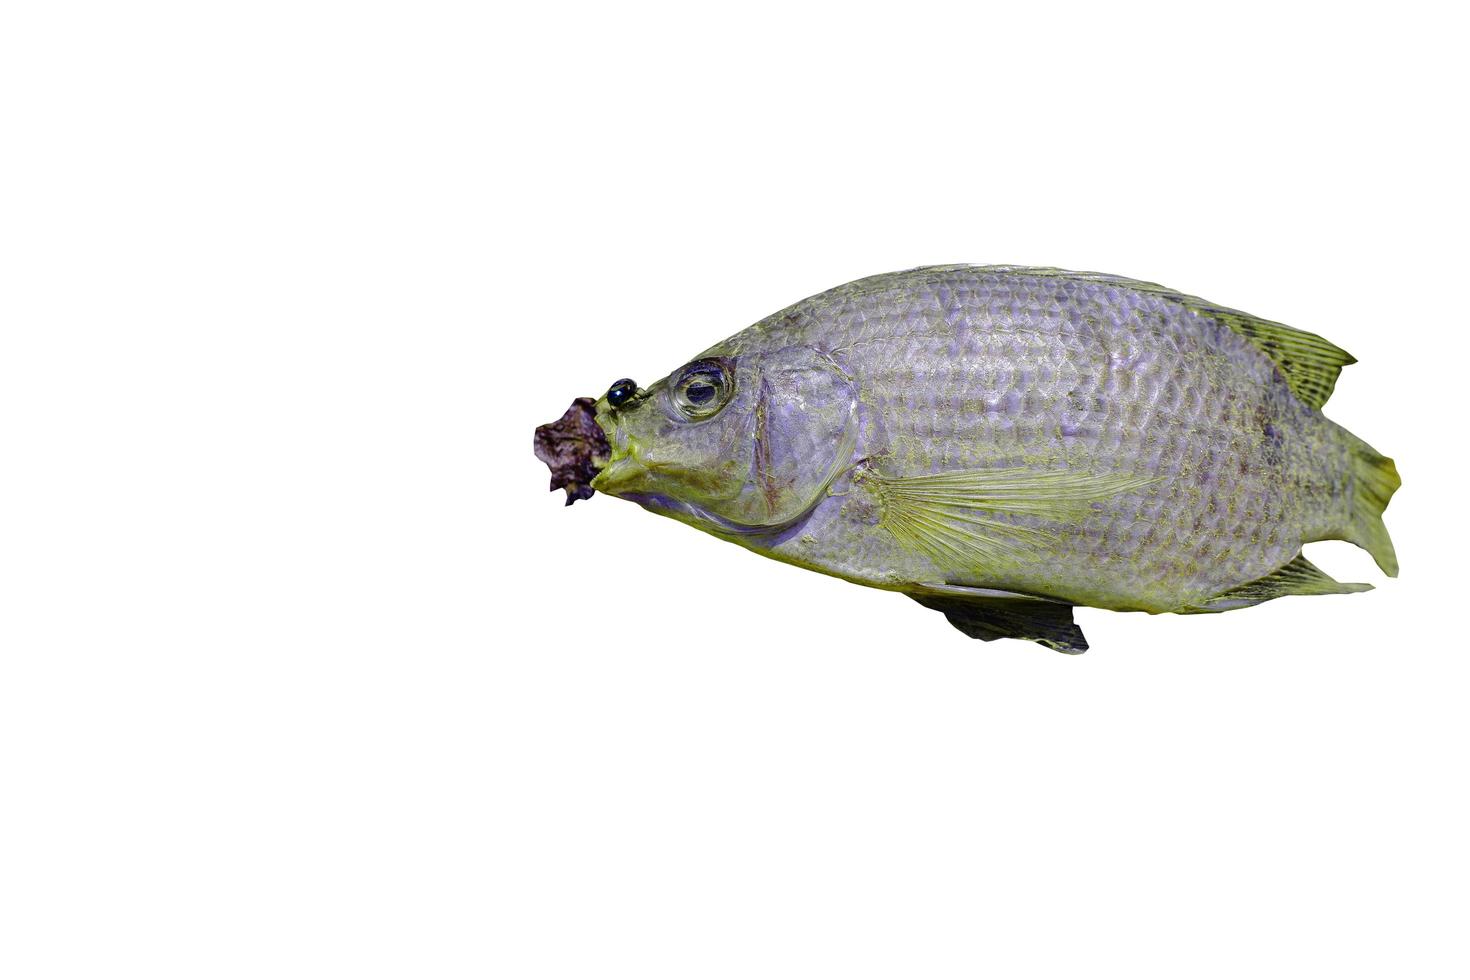 Dead Nile tilapia fish on the white background with clipping path.  World warming concept. photo